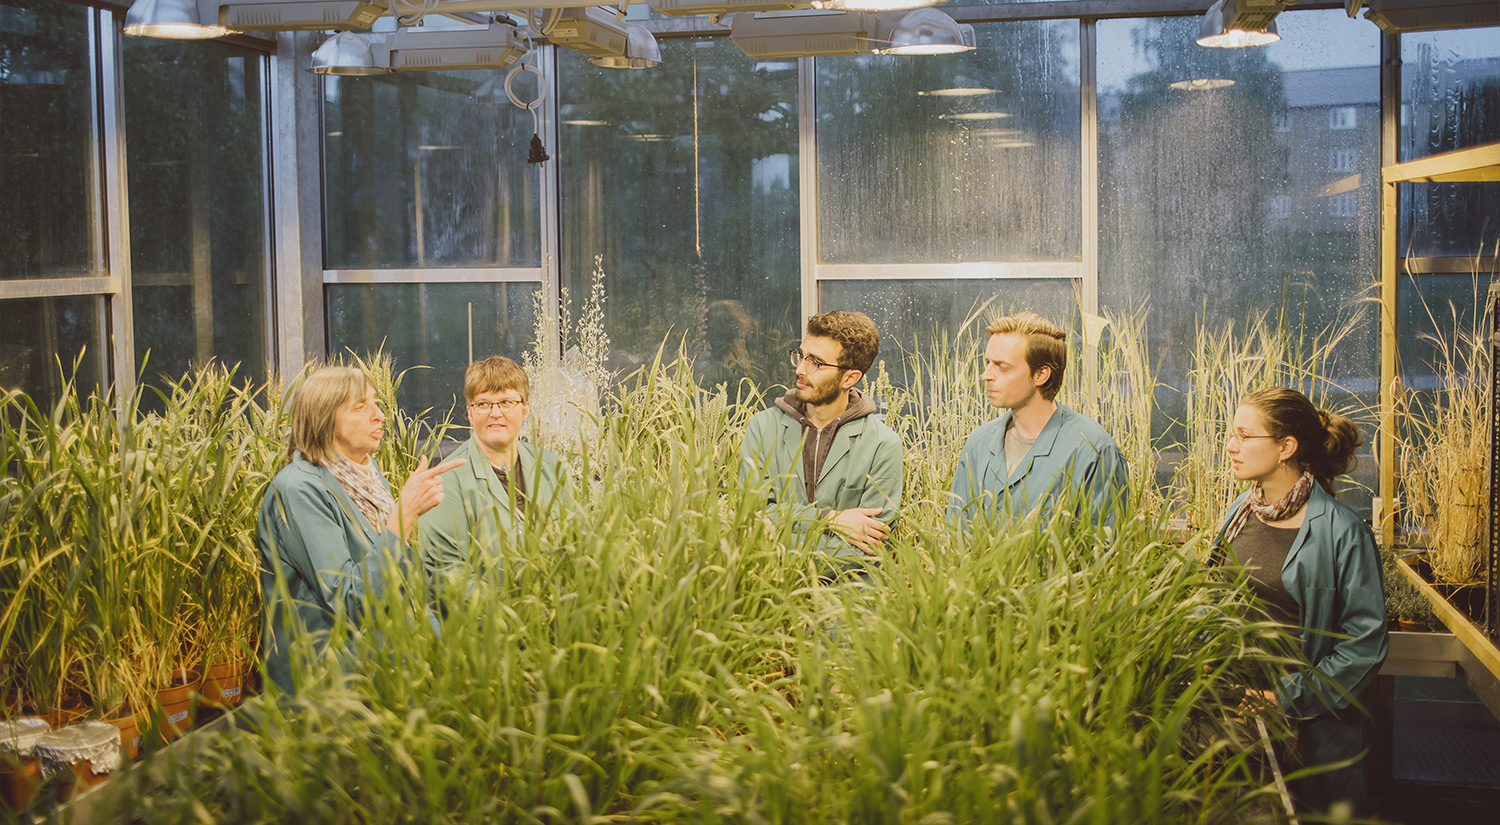 Students and staff discussing research in the greenhouse surrounded by plants